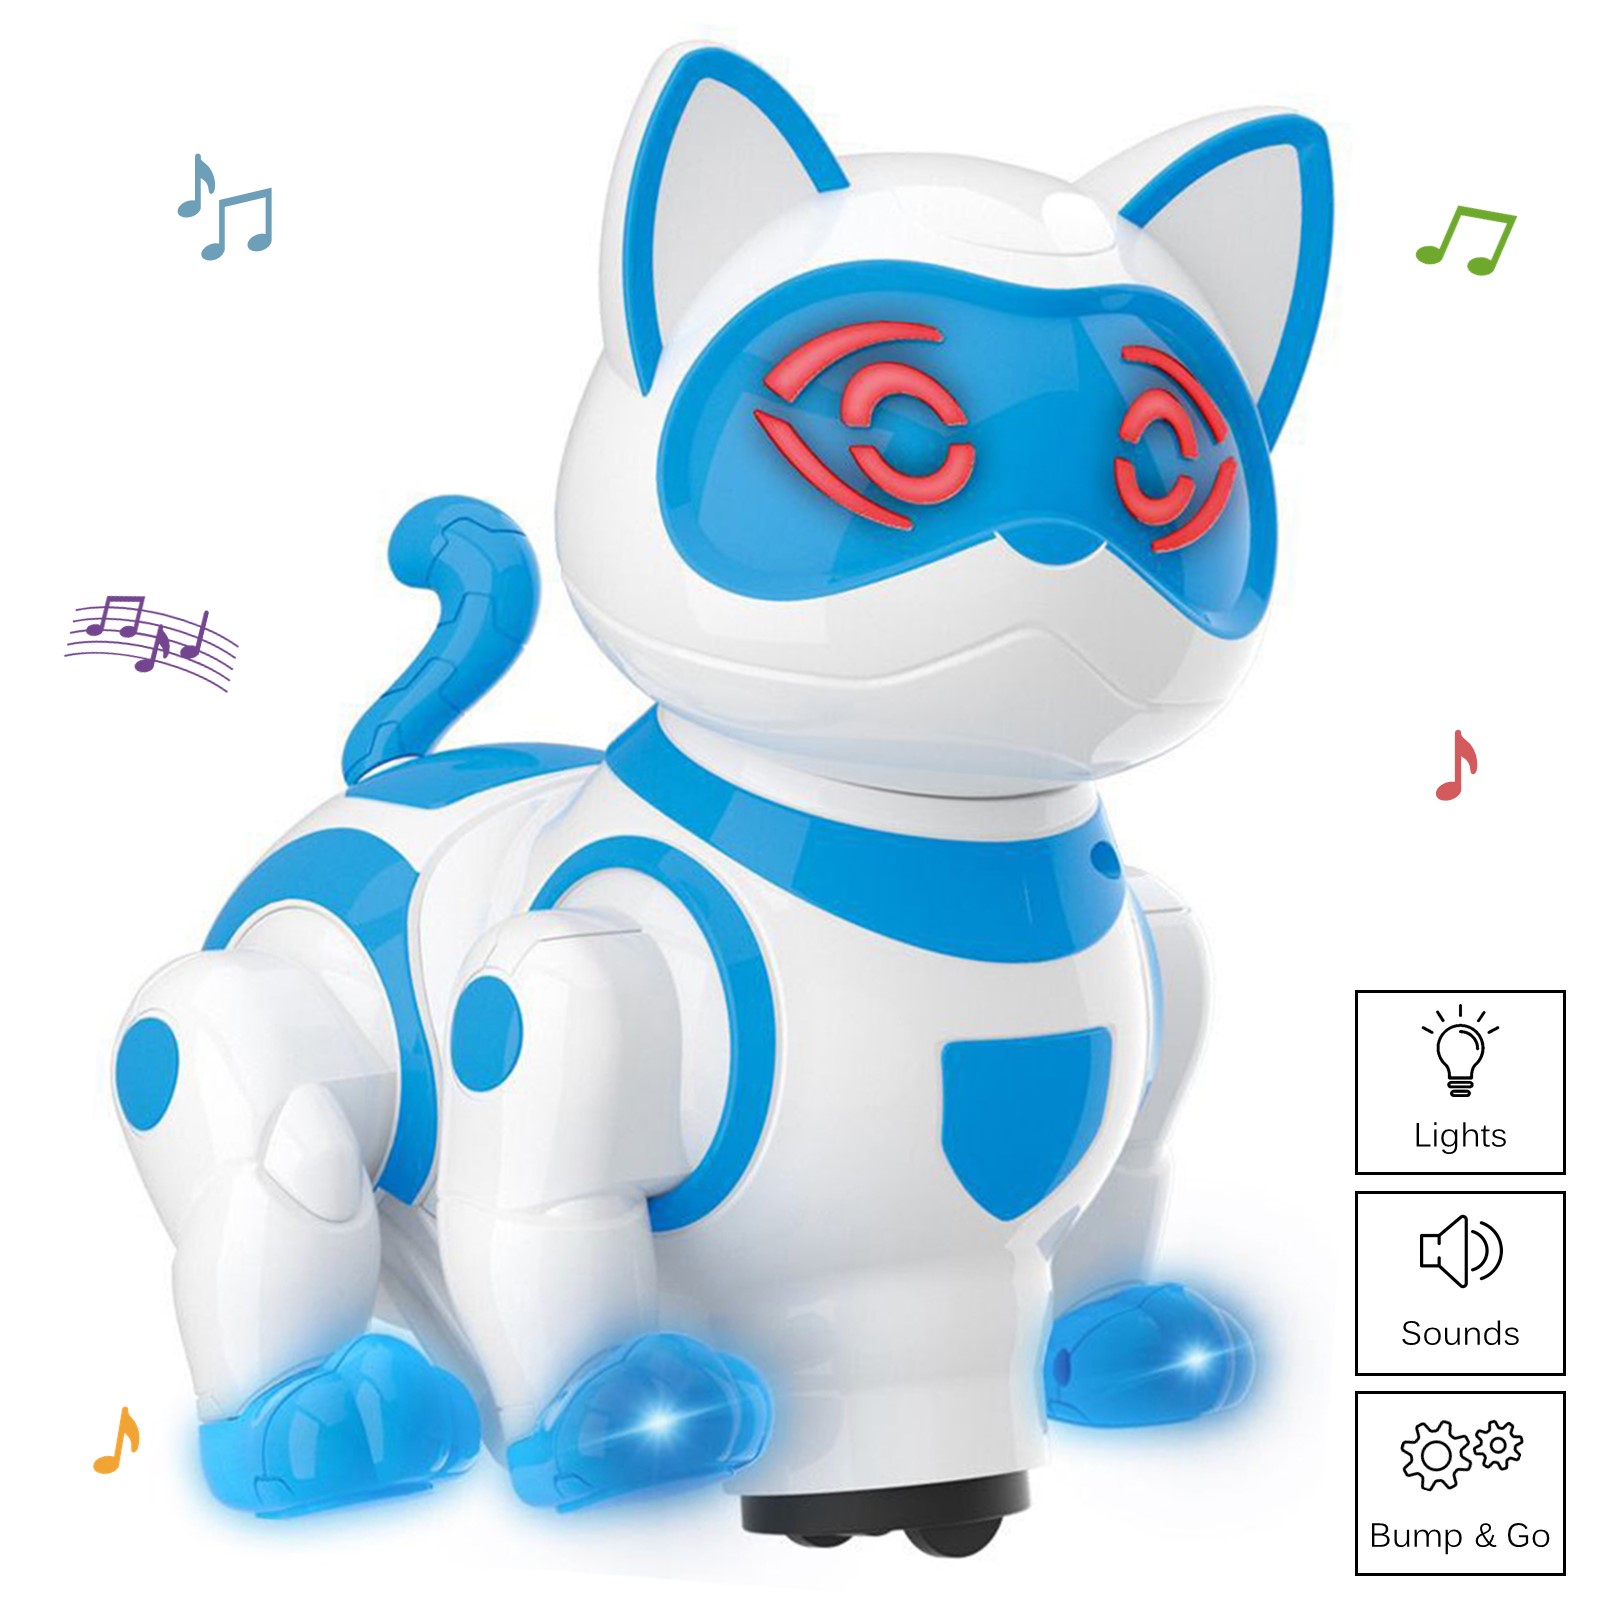 Vokodo Pet Robotic Dance Cat Interactive Kids Toy Kitty Walks Meows Sits With Lights And Music Friendly Electronic Robot Companion Bump And Go Action Play Great For Preschool Children Boy Girl Toddler